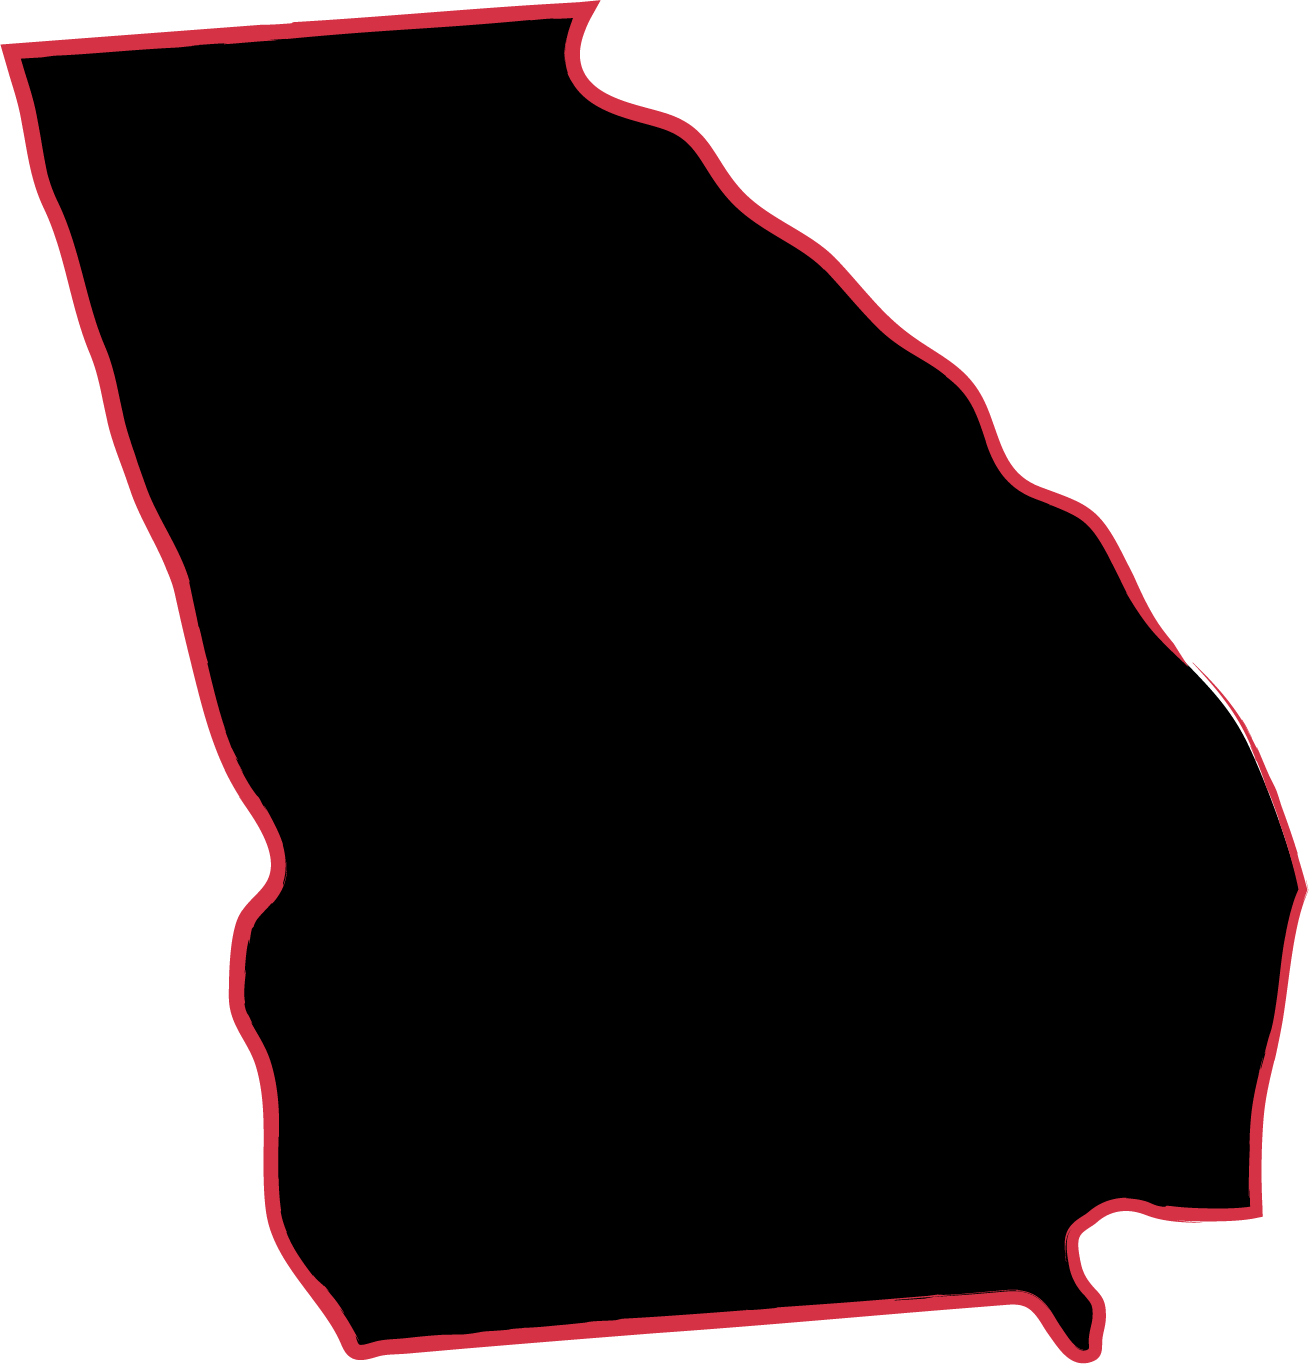 State of Georgia outlined in red